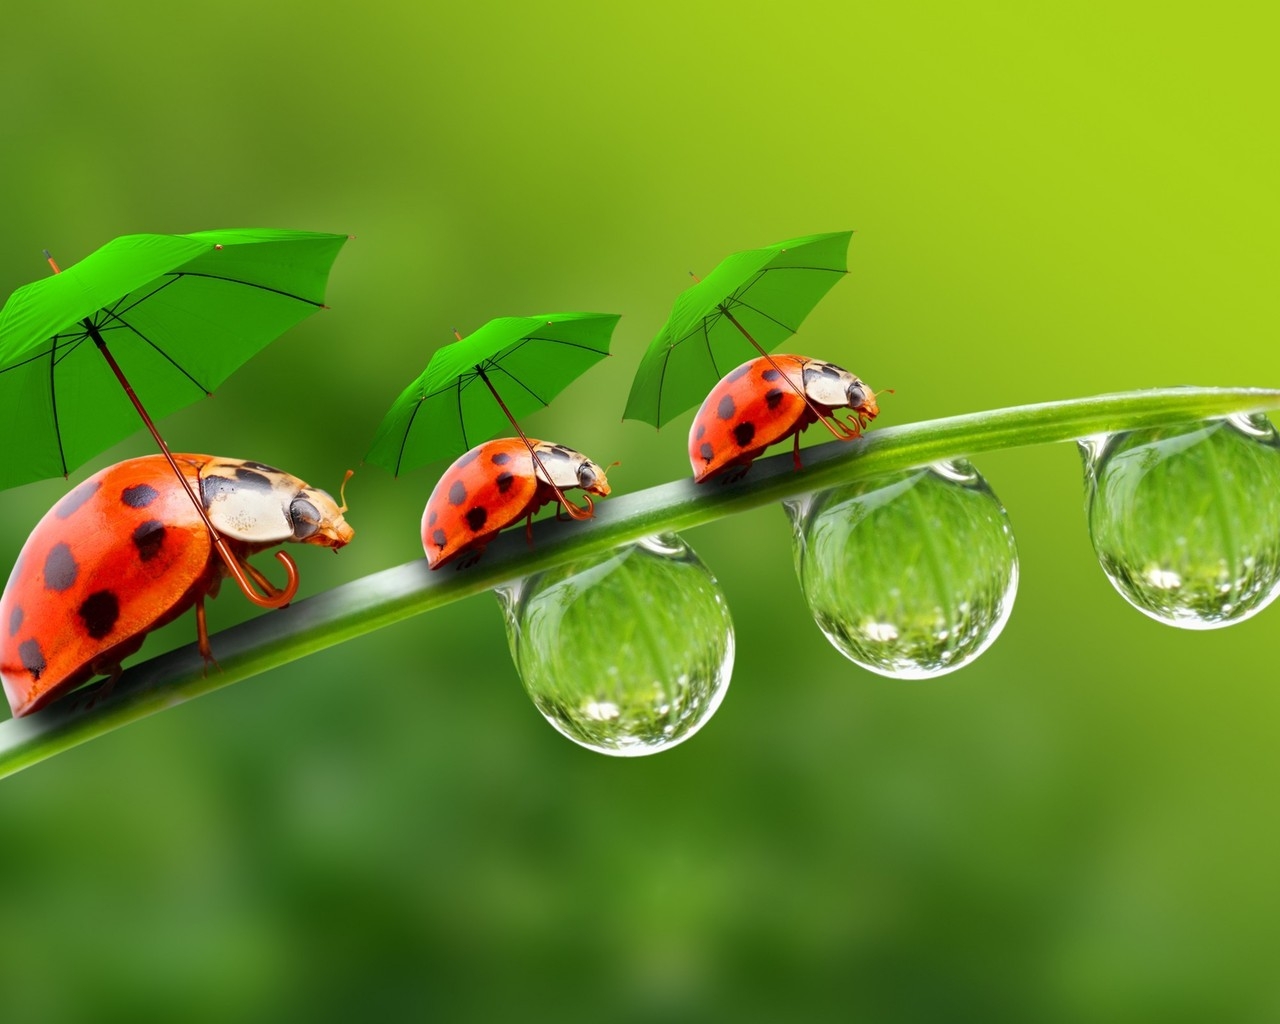 Ladybugs with Umbrellas for 1280 x 1024 resolution